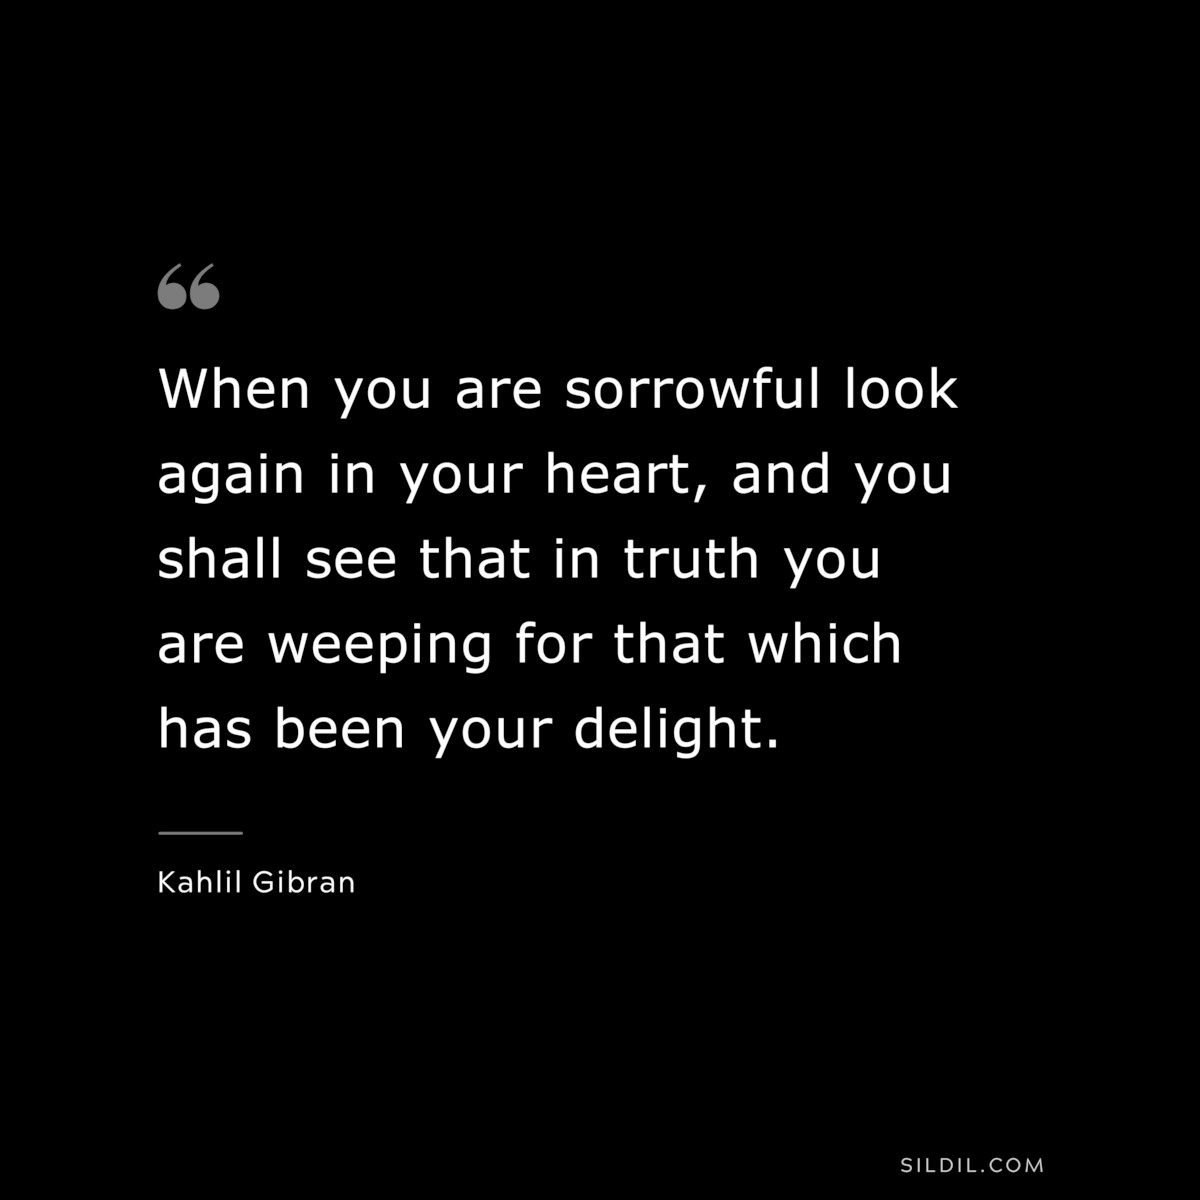 When you are sorrowful look again in your heart, and you shall see that in truth you are weeping for that which has been your delight. ― Kahlil Gibran